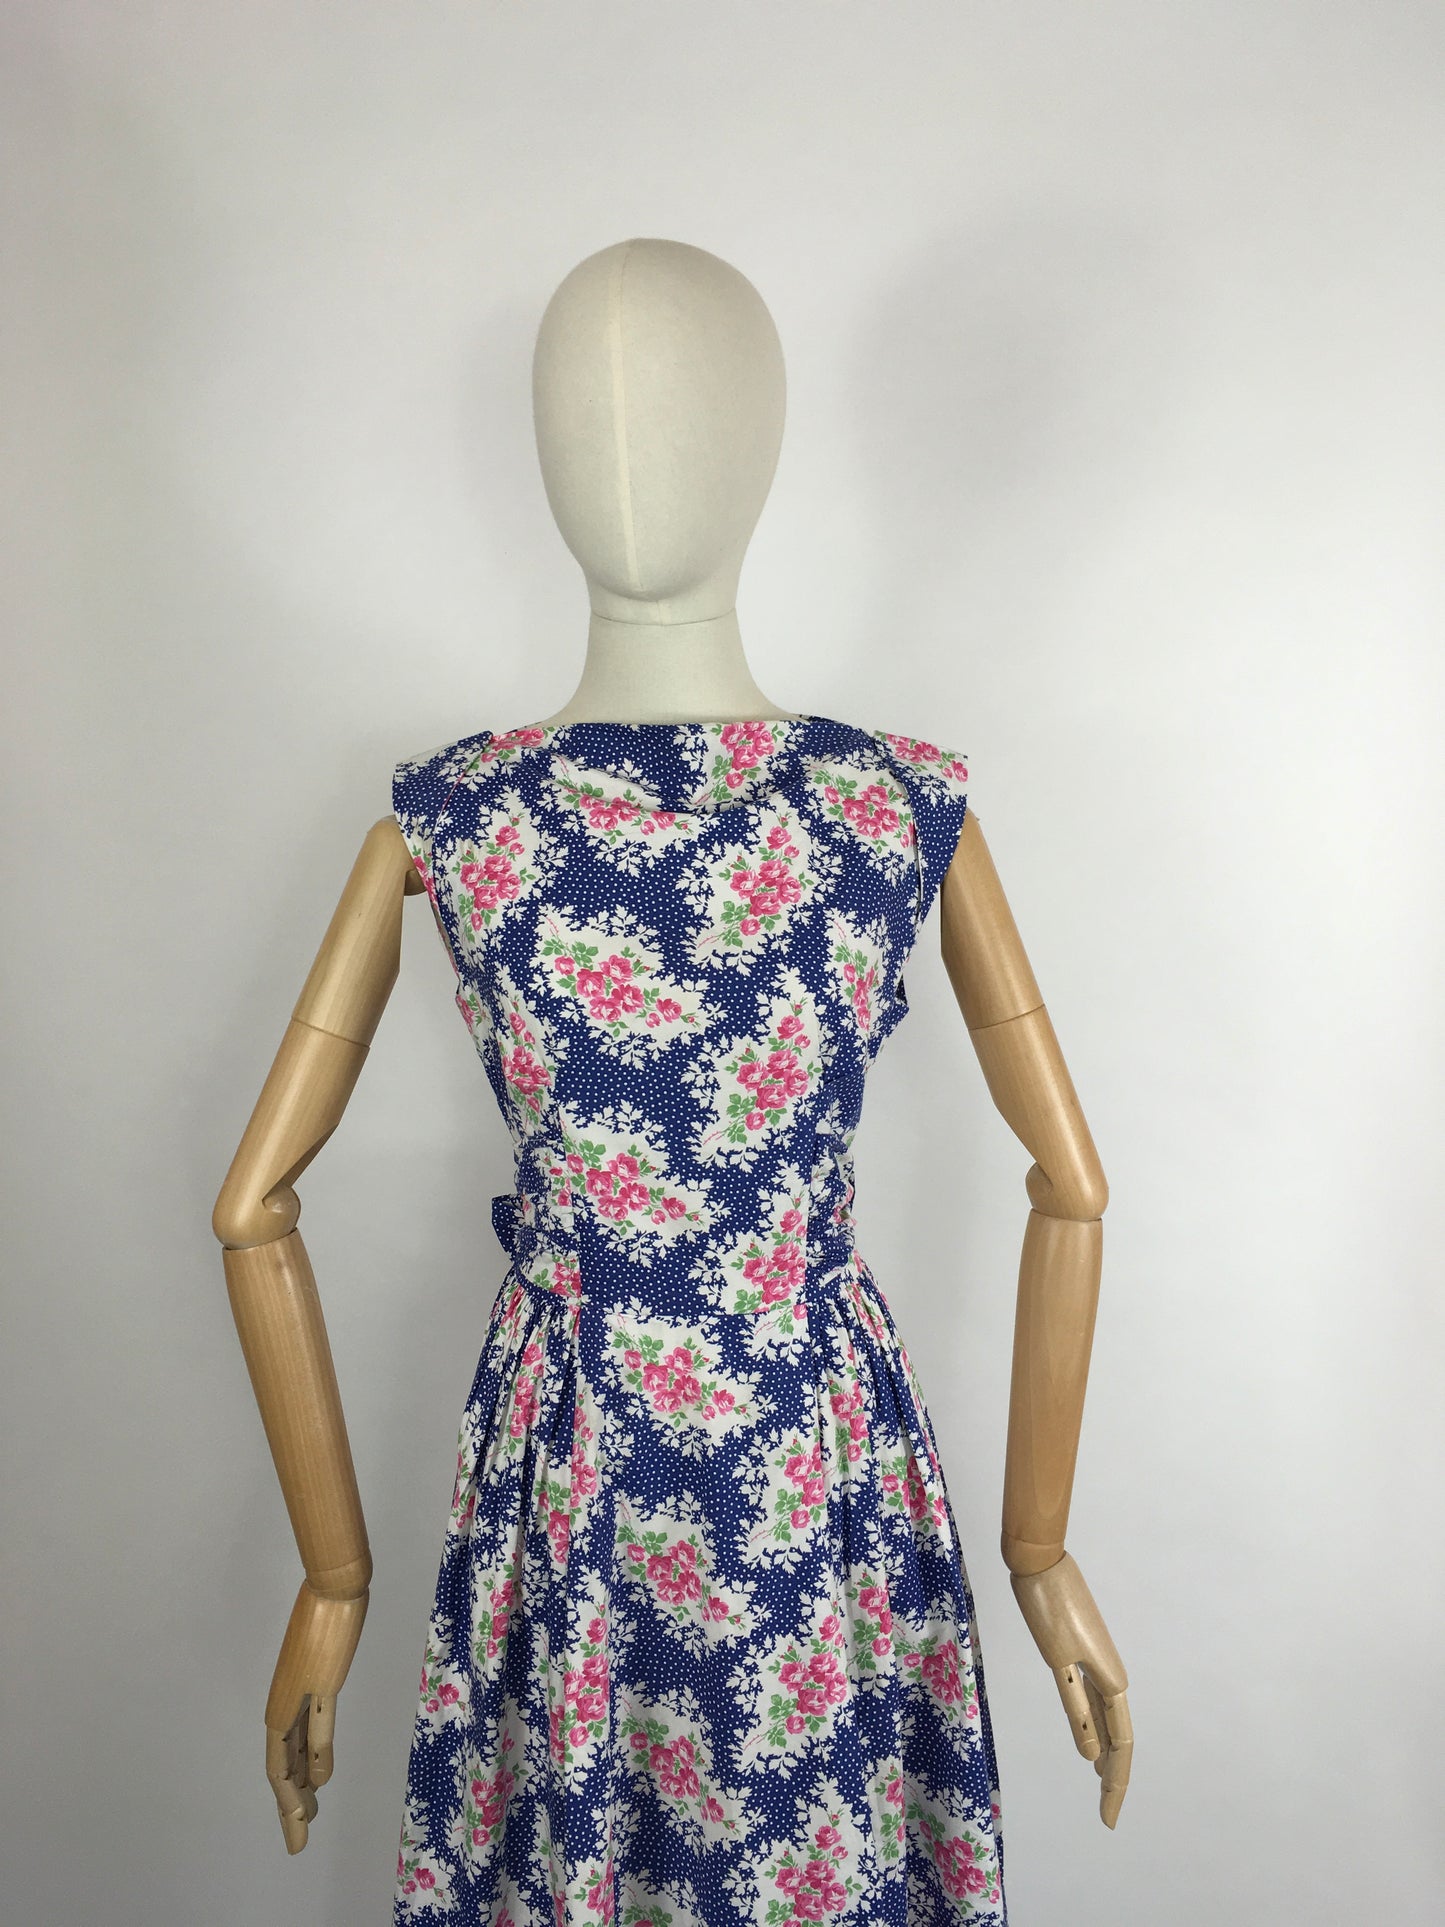 Original 1950s Darling Floral Day Dress - In a Beautiful Crisp Cotton in Rich Blue, Powder Pinks, White and Grassy Green.